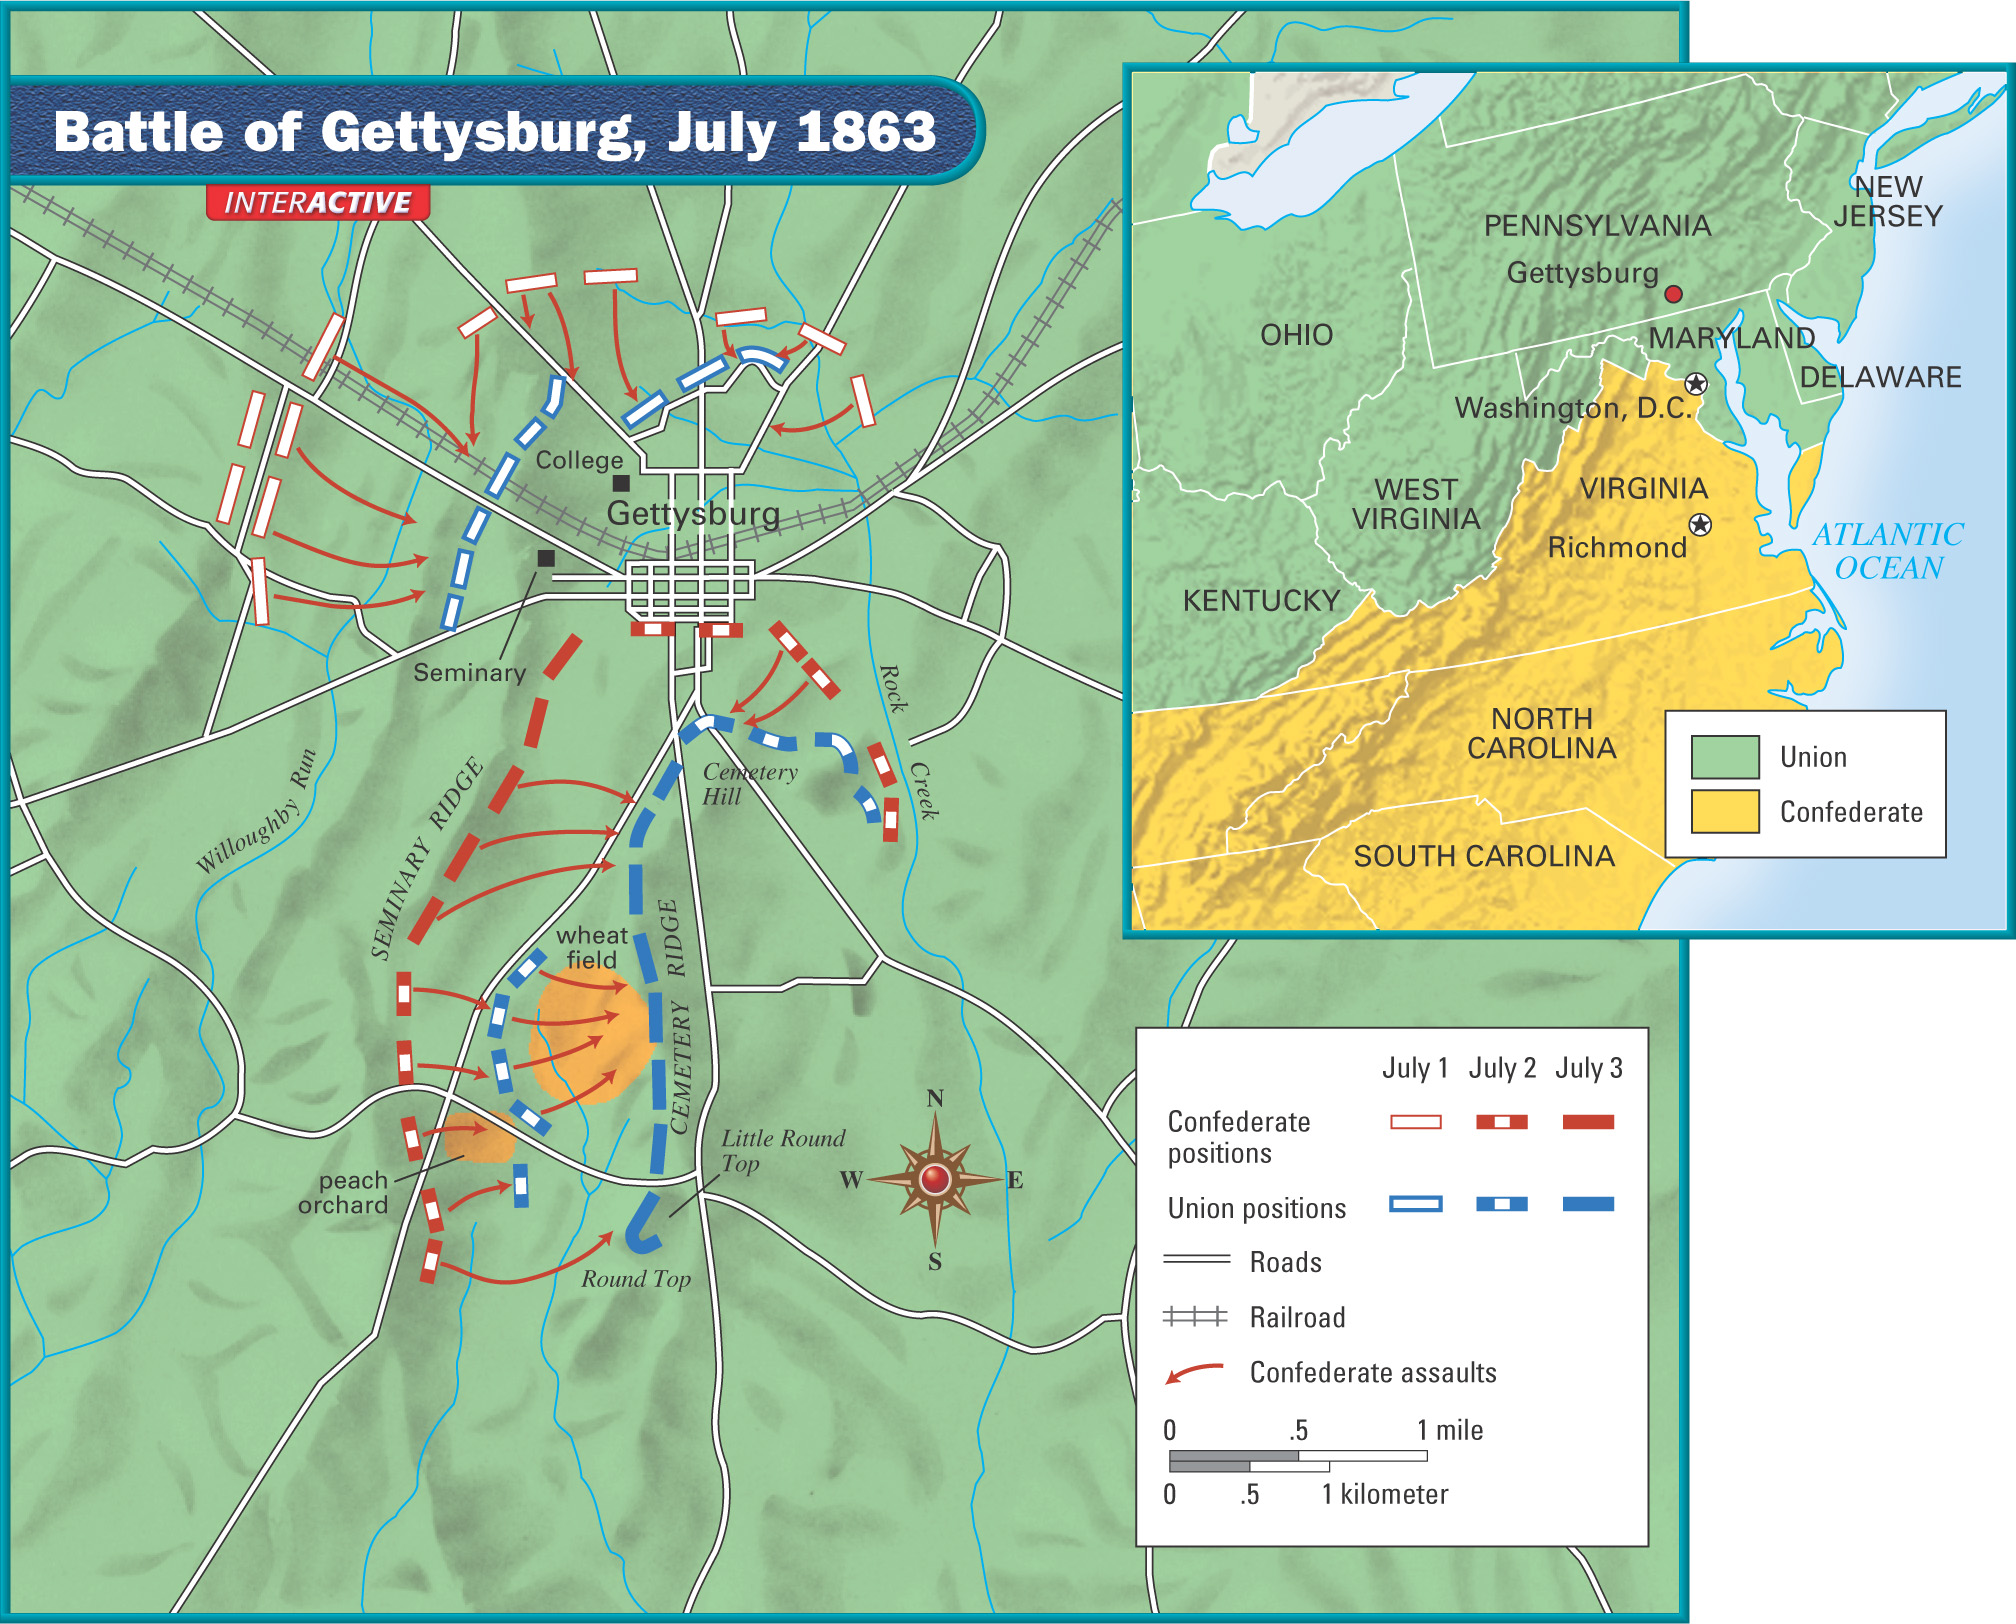 A map shows the Battle of Gettysburg.